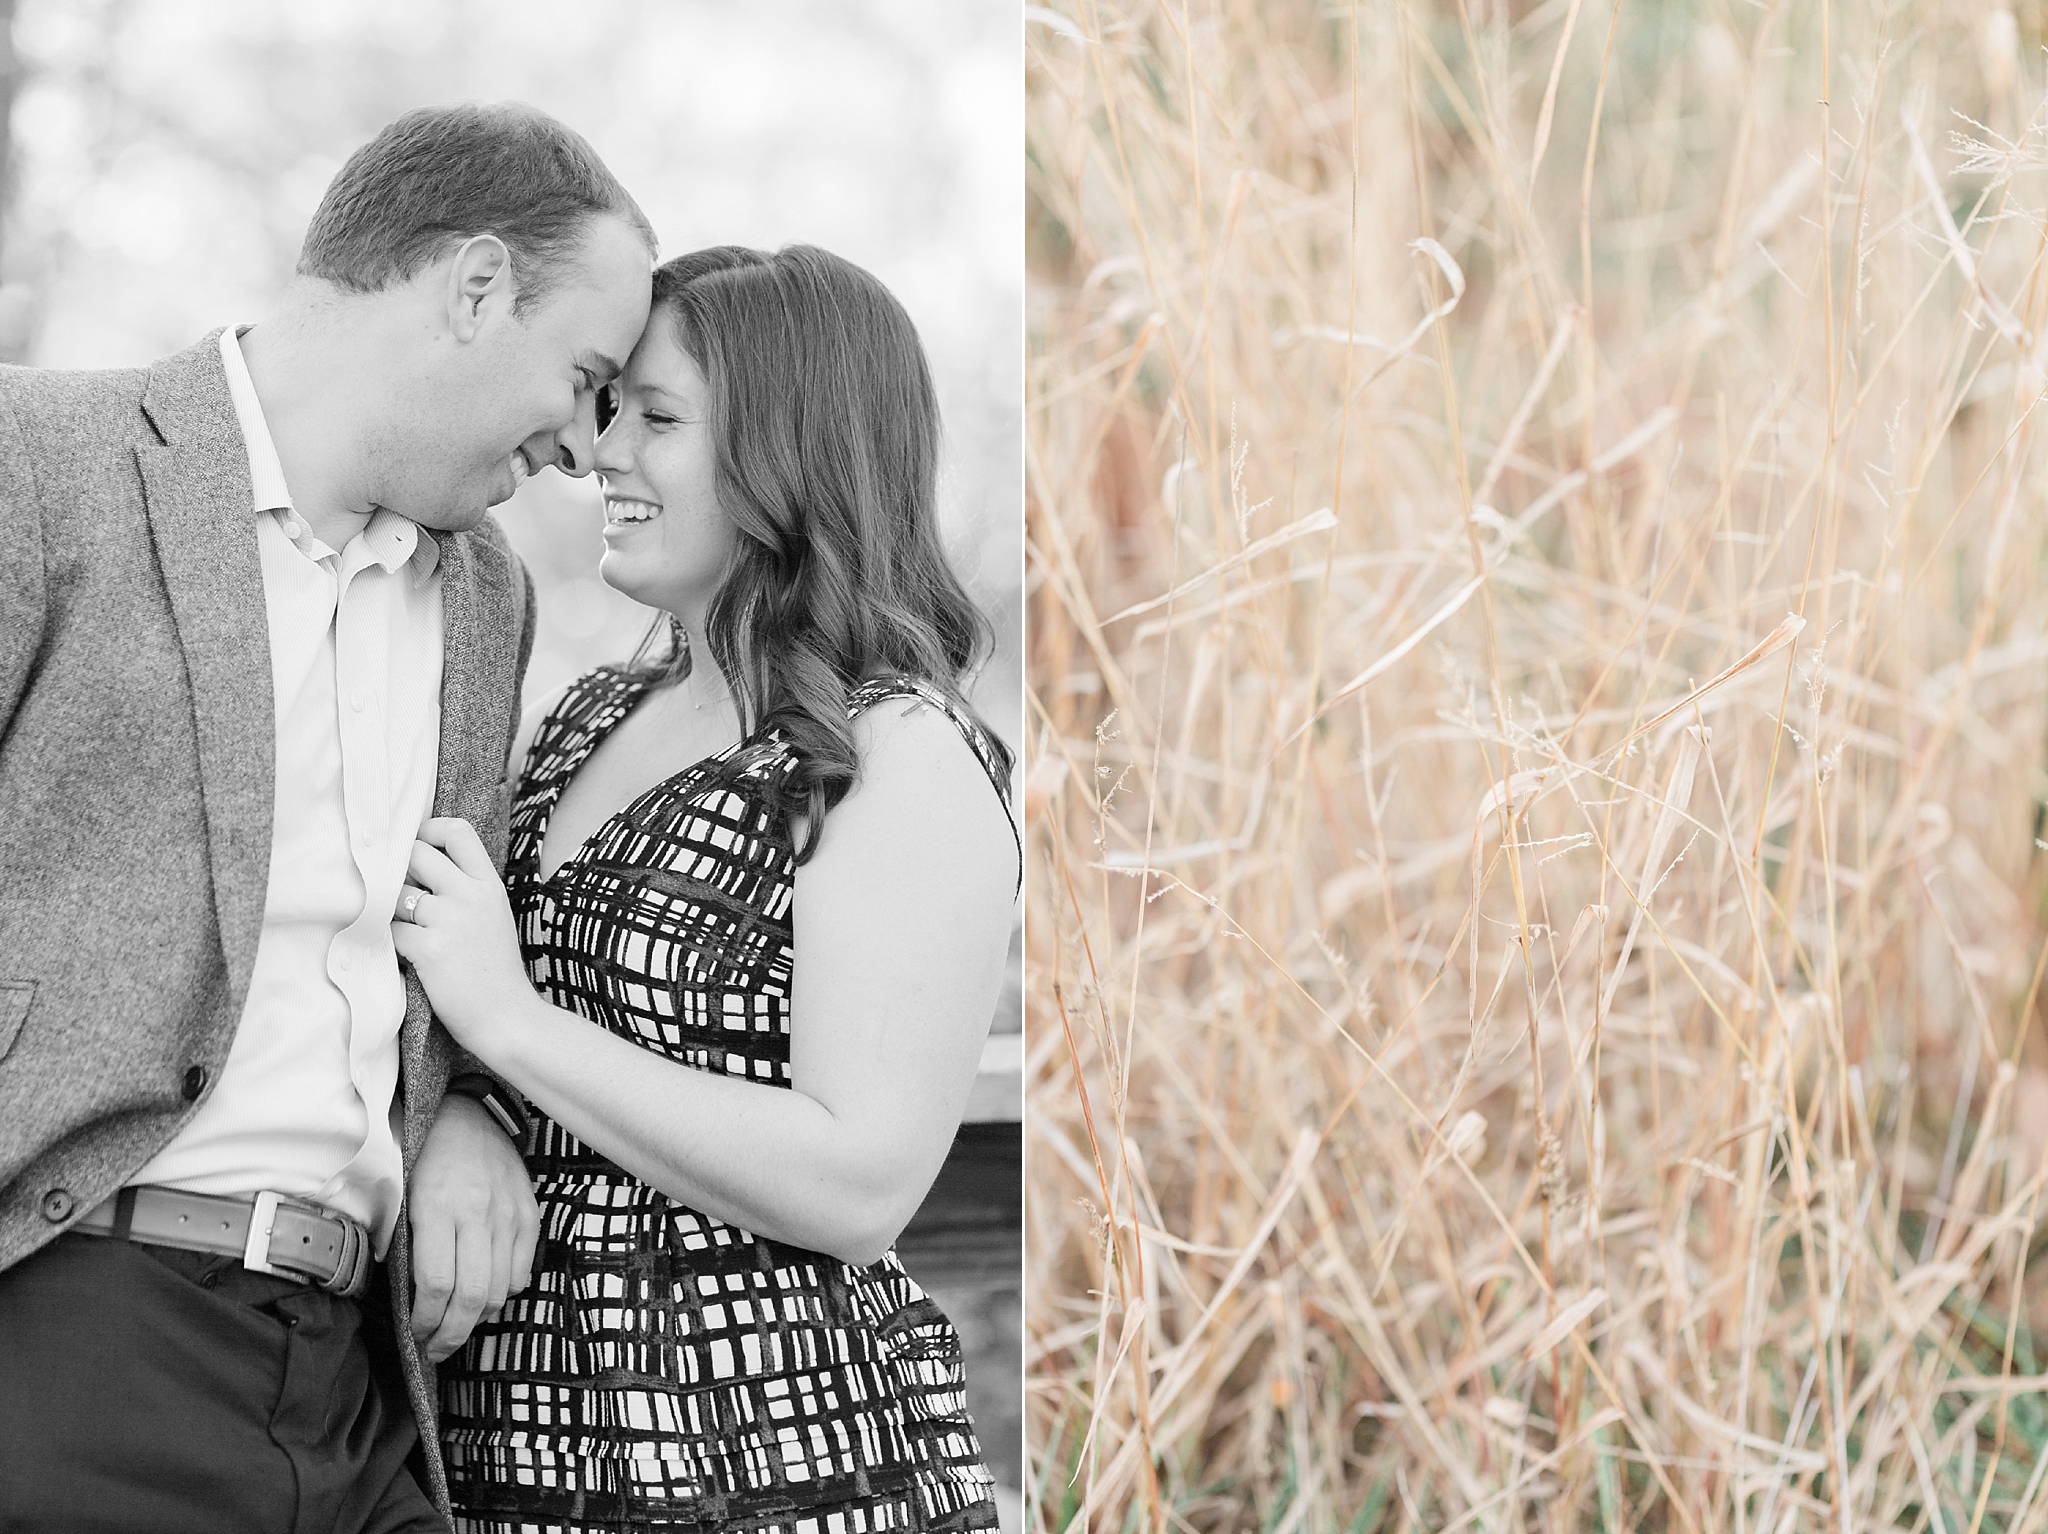 Fall engagement photos never looked more beautiful than at Manassas Battlefield Park! These images were captured by DC wedding photographer, Alicia Lacey. 